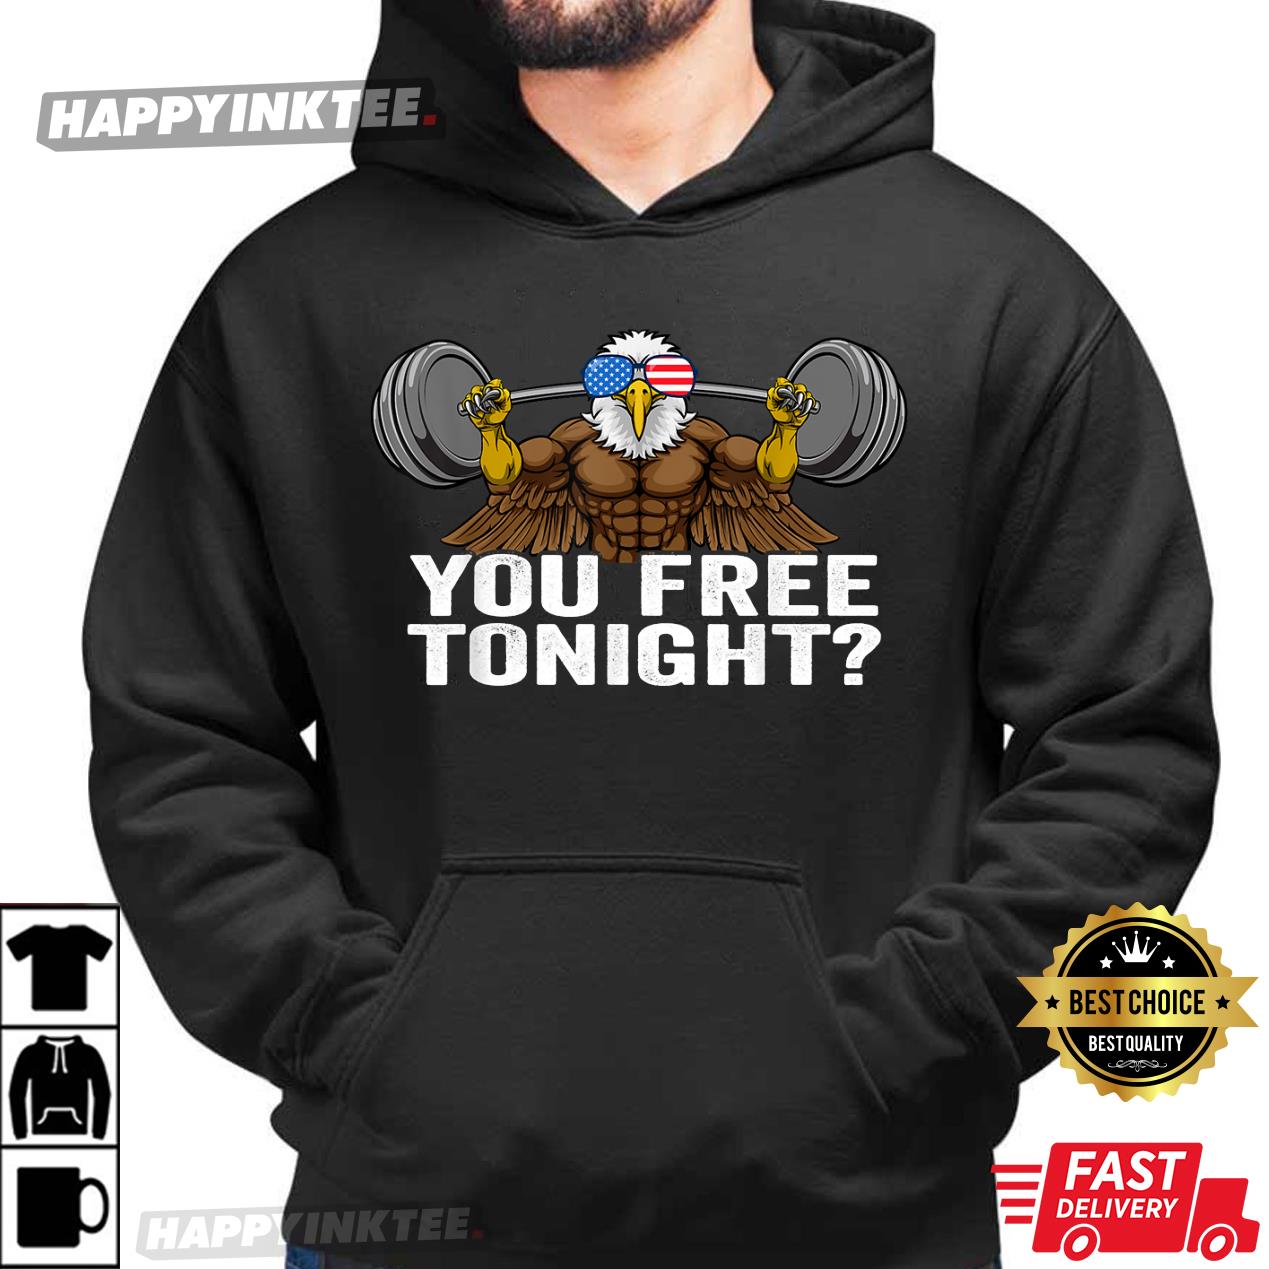 You Free Tonight Bald Eagle, Funny Patriotic 4th of July Gift T-Shirt